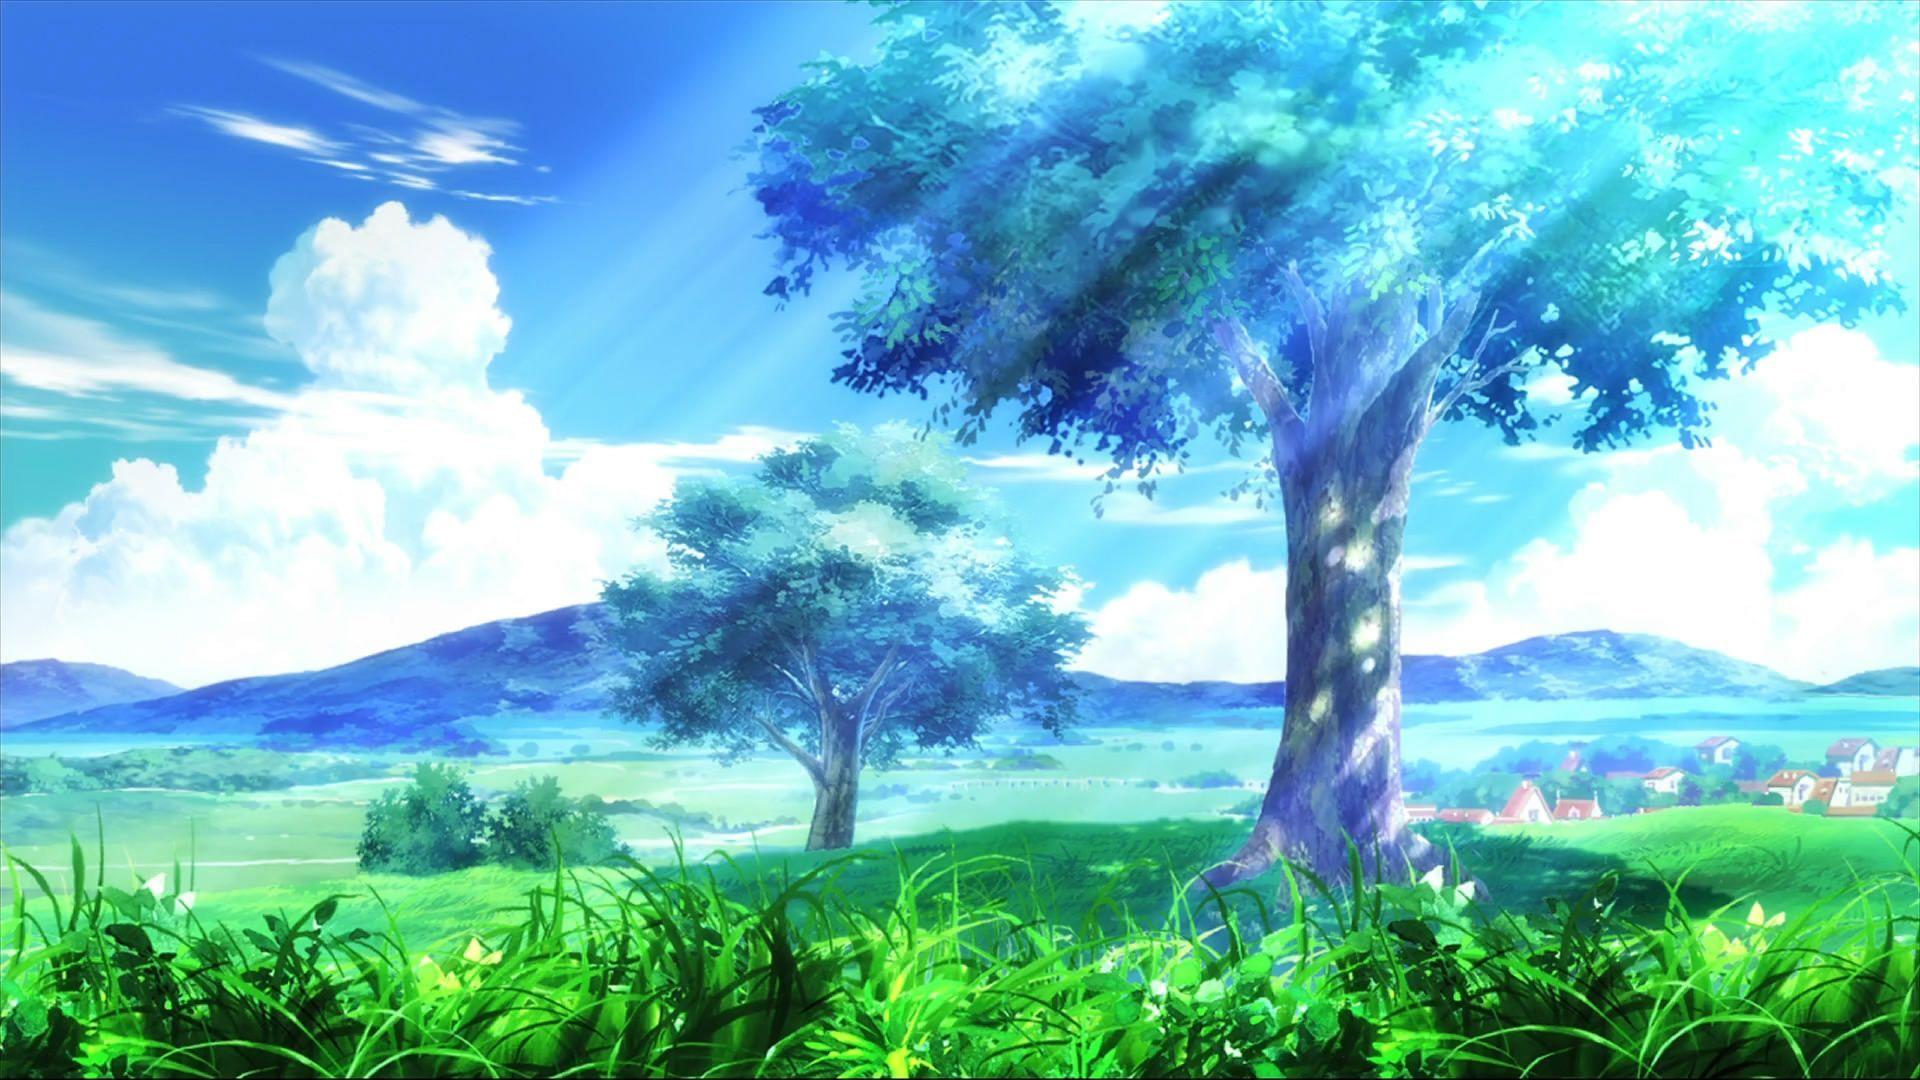 Anime Scenery Wallpapers - Top Free Anime Scenery ...